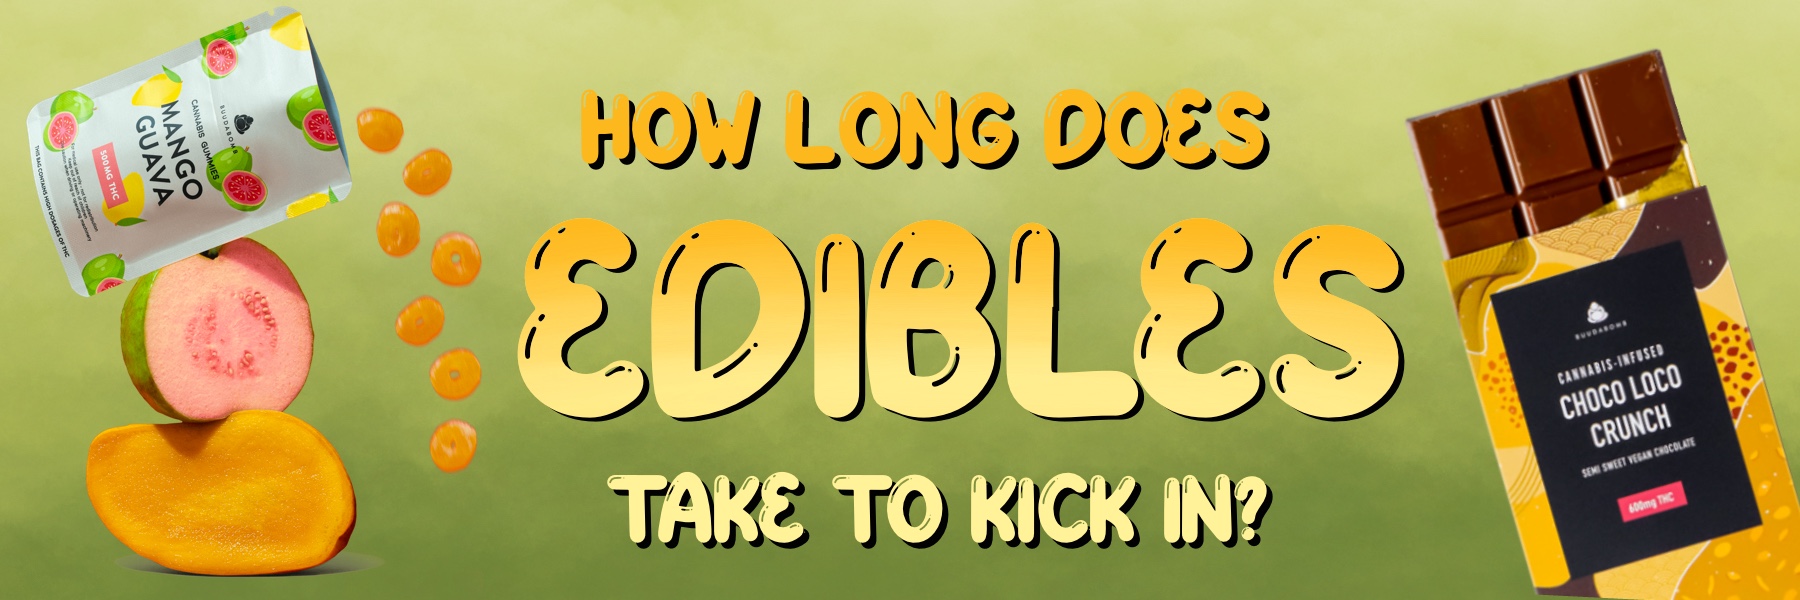 How long does edibles take to kick in?